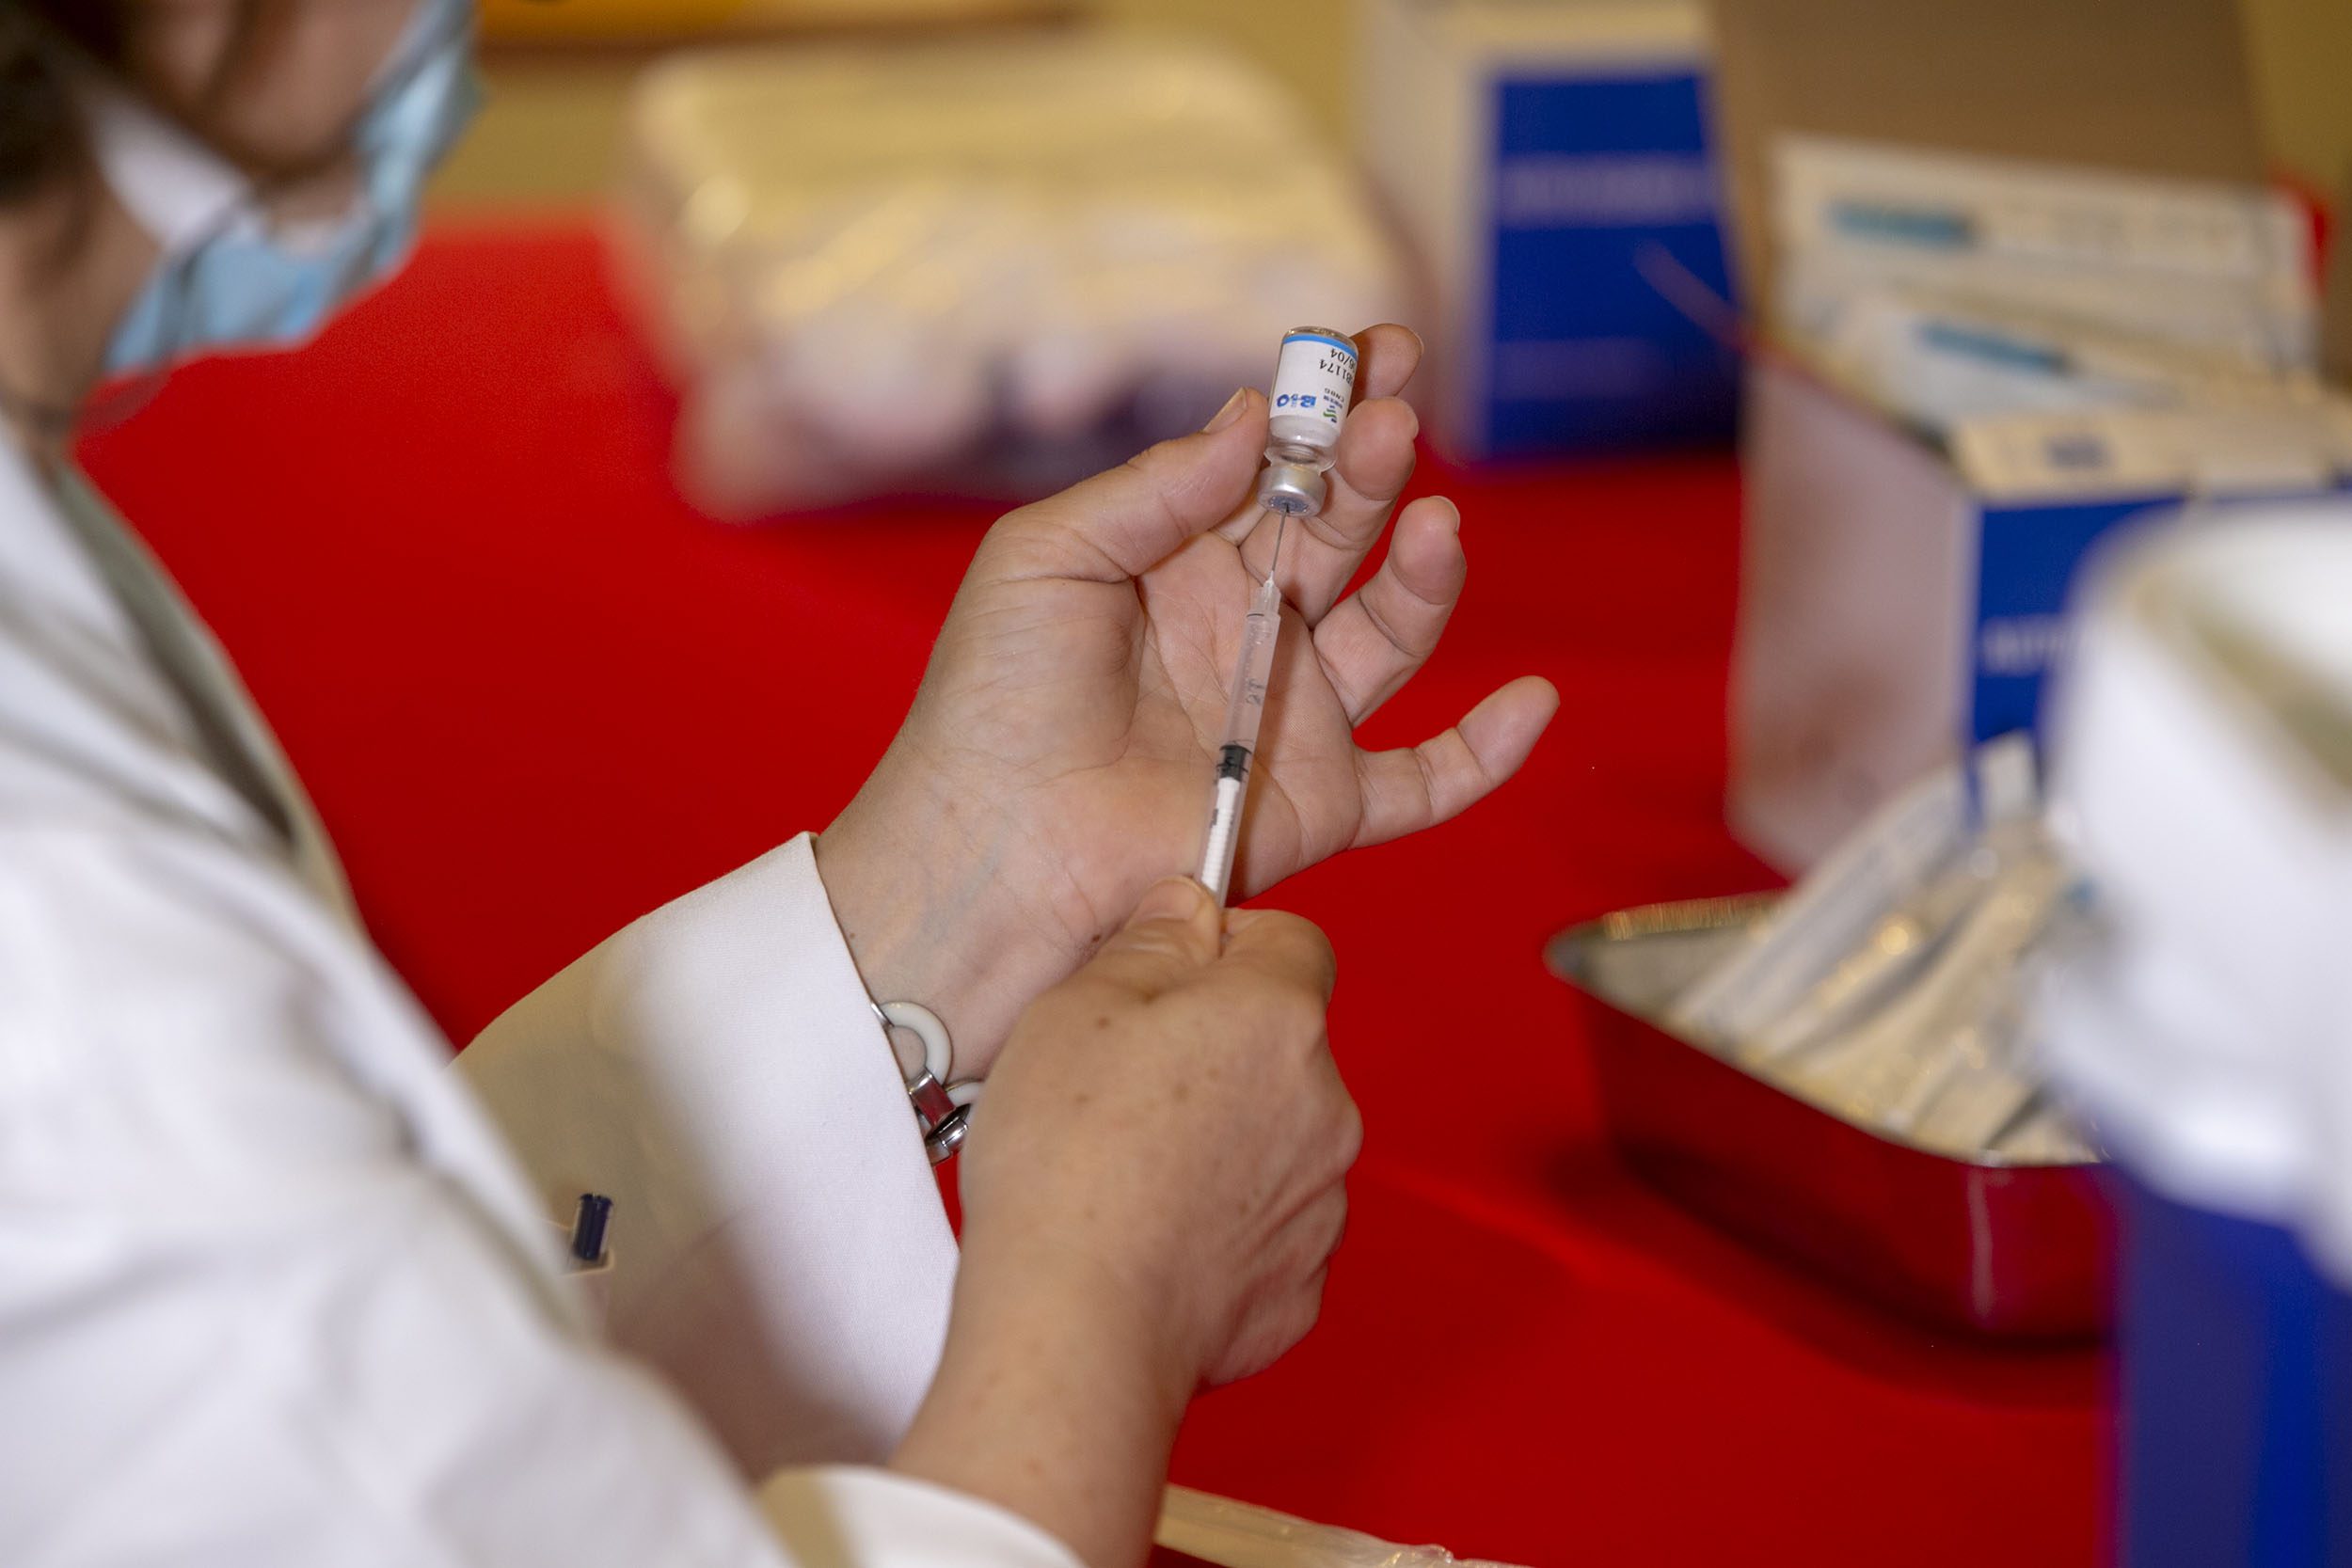 Turkey has administered over 116.02 million doses of COVID-19 vaccines